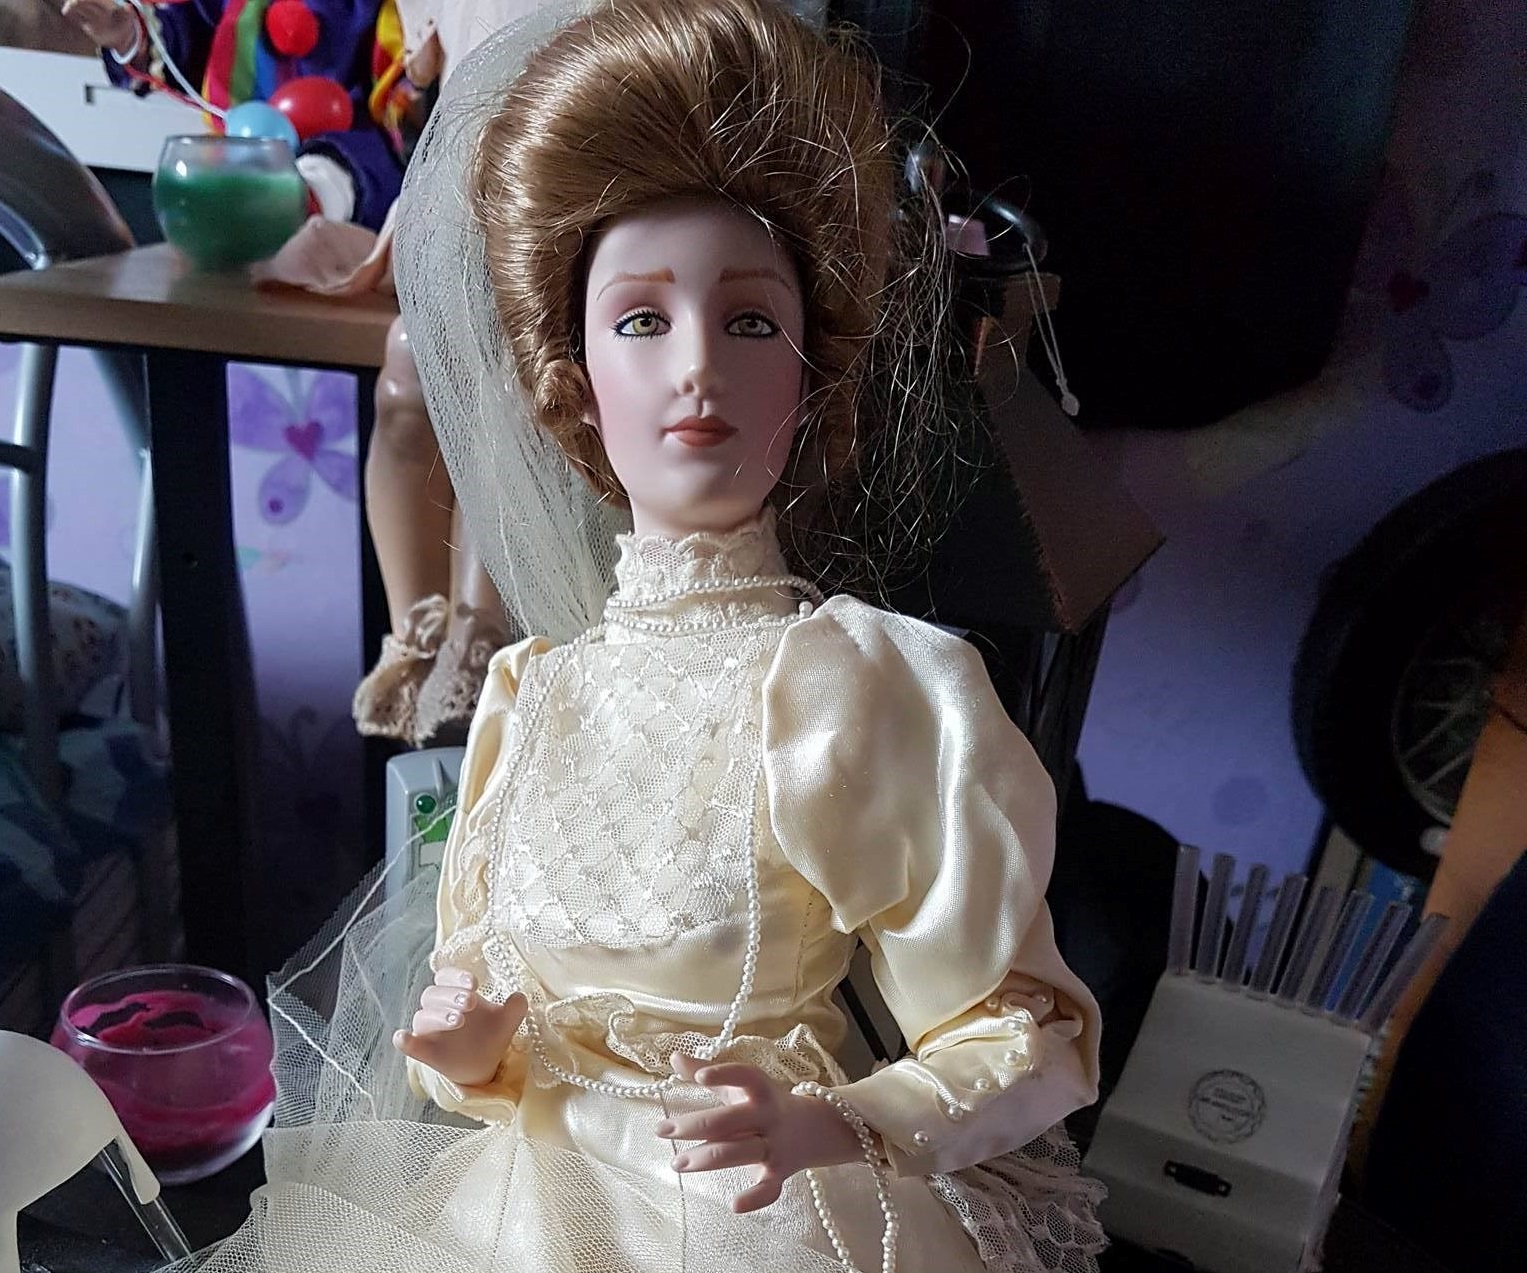 The Bridal Doll is said to give people nightmares and set off fire alarms.